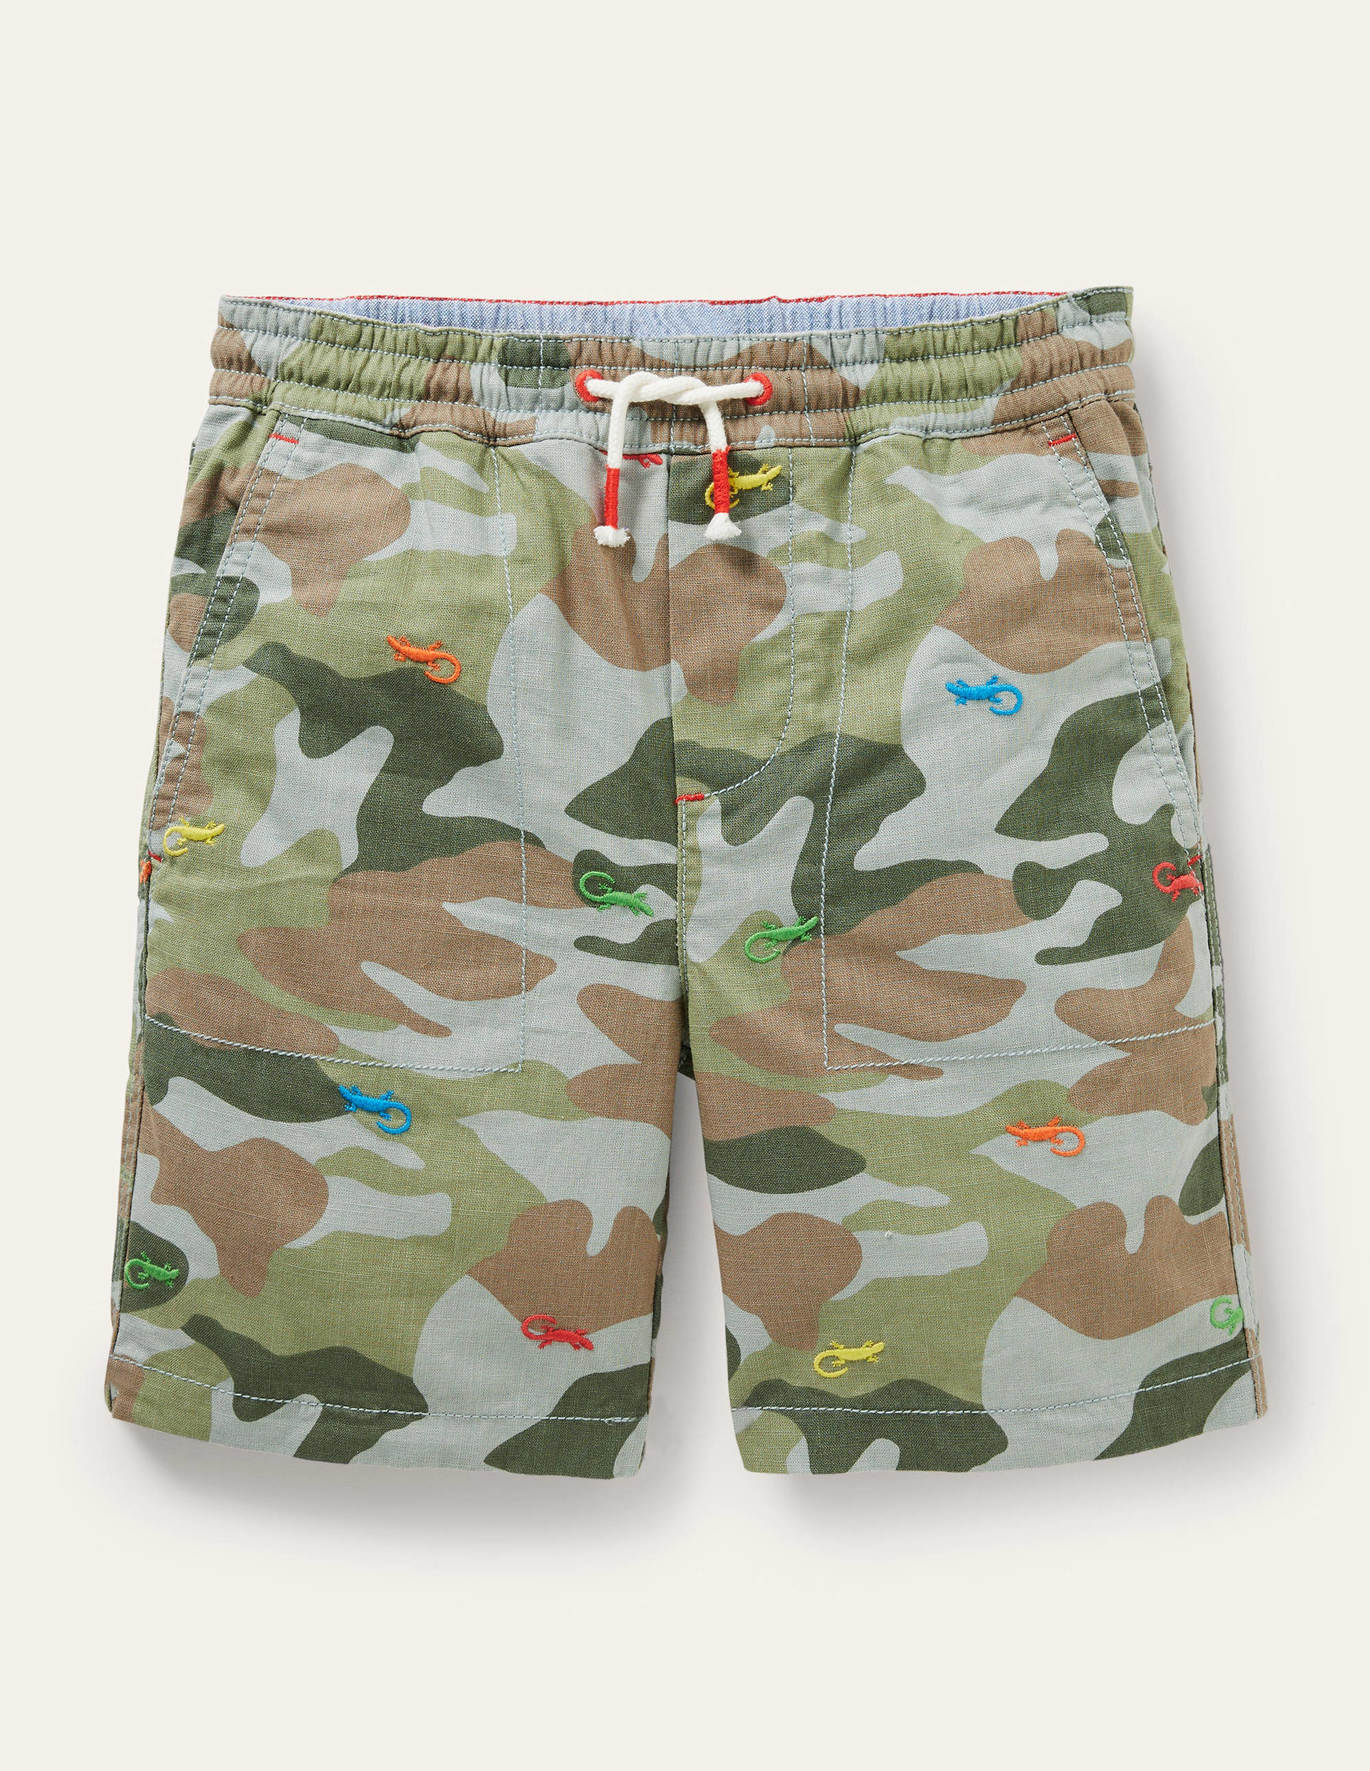 Boden Pull-on Drawstring Shorts - Green Camouflage Lizard